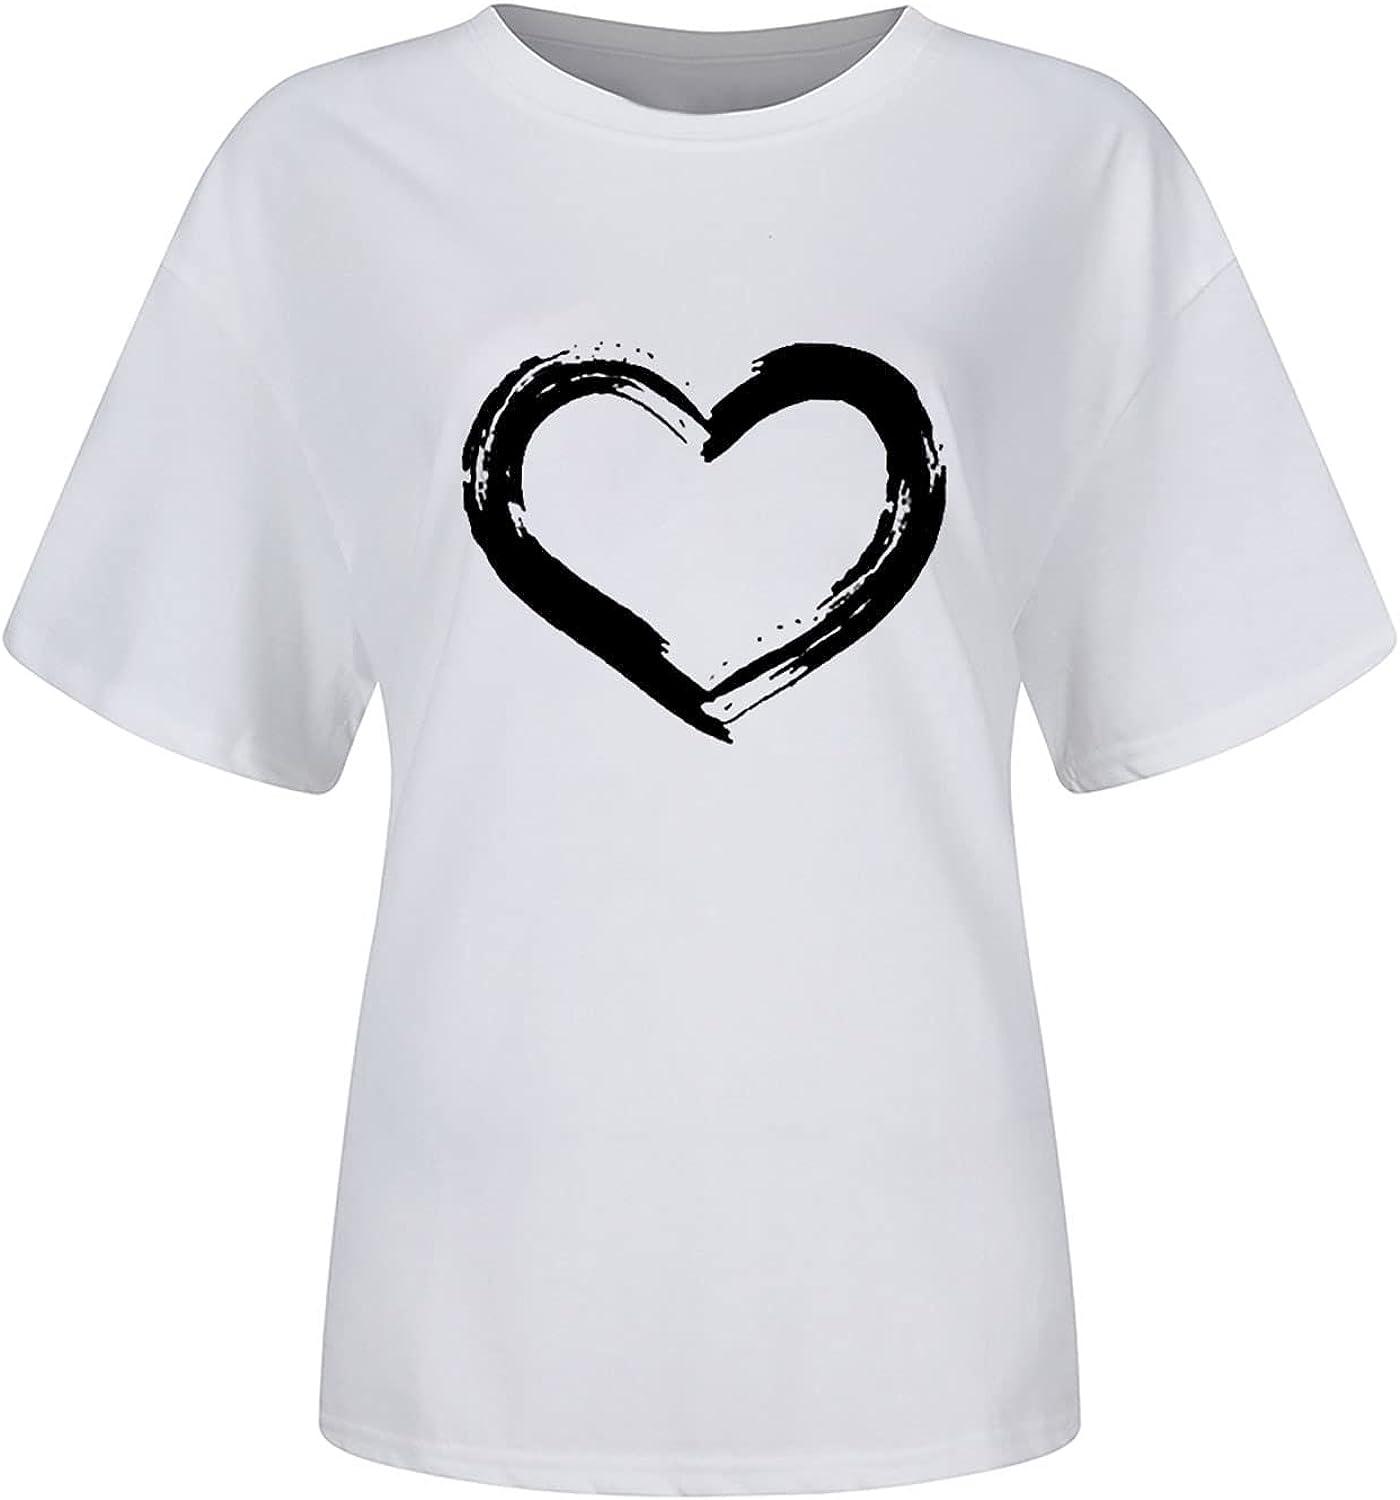 Valentines Day Shirts for Women Short Sleeve Cute Love Heart Print